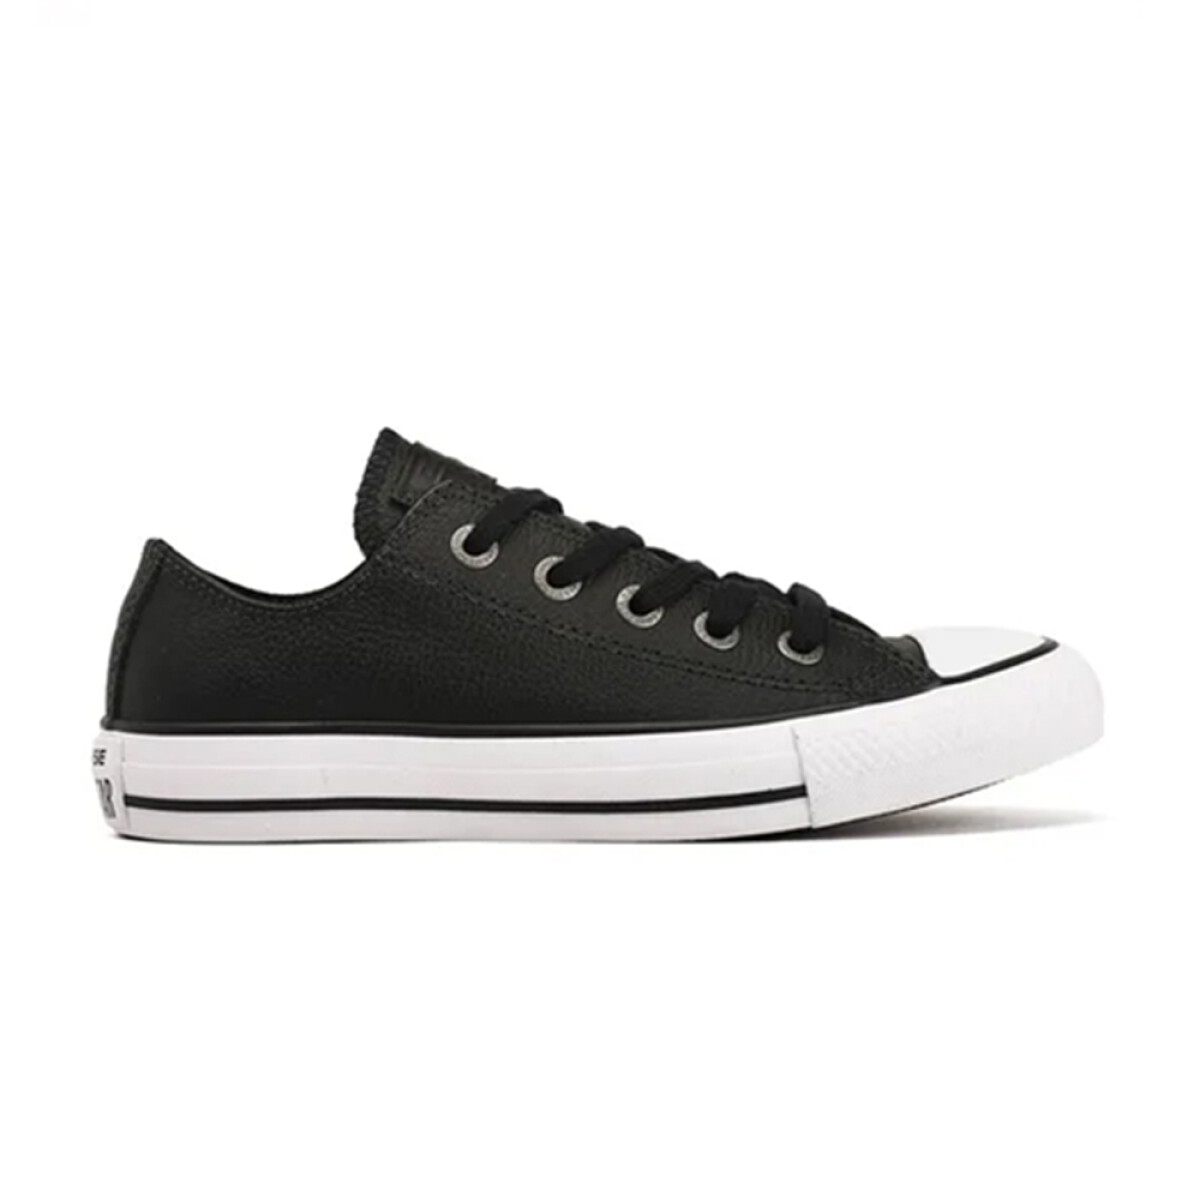 CHUCK TAYLOR OX LEATHER - CONVERSE 